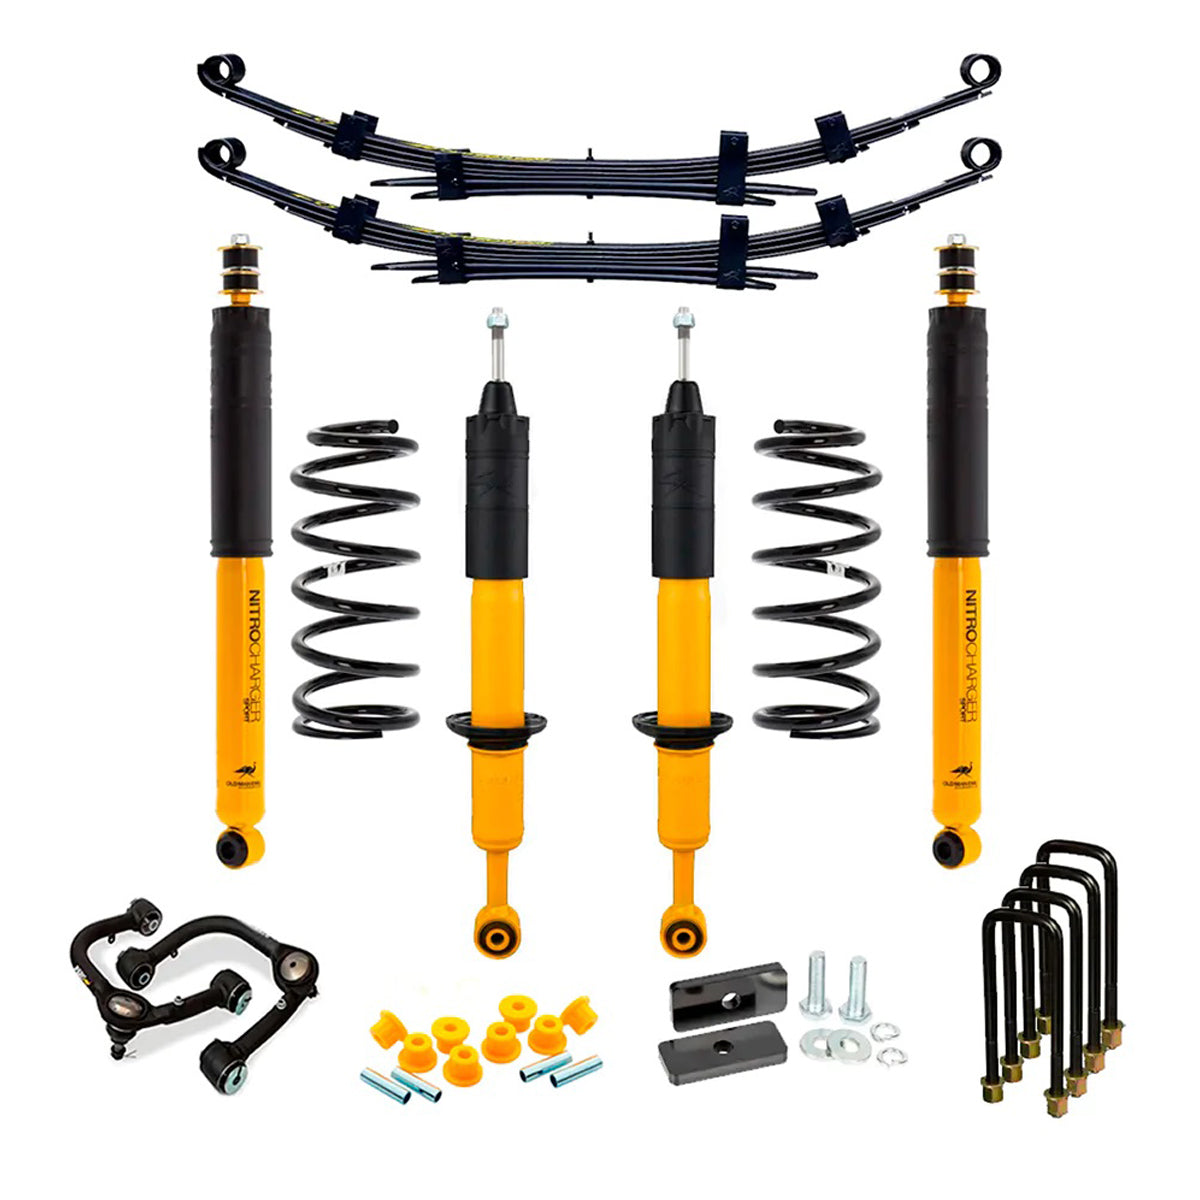 An Old Man Emu OME 2.5 inch Lift Kit for Tacoma (05-15) - Front Shocks Assembly that enhances ground clearance and suspension articulation.